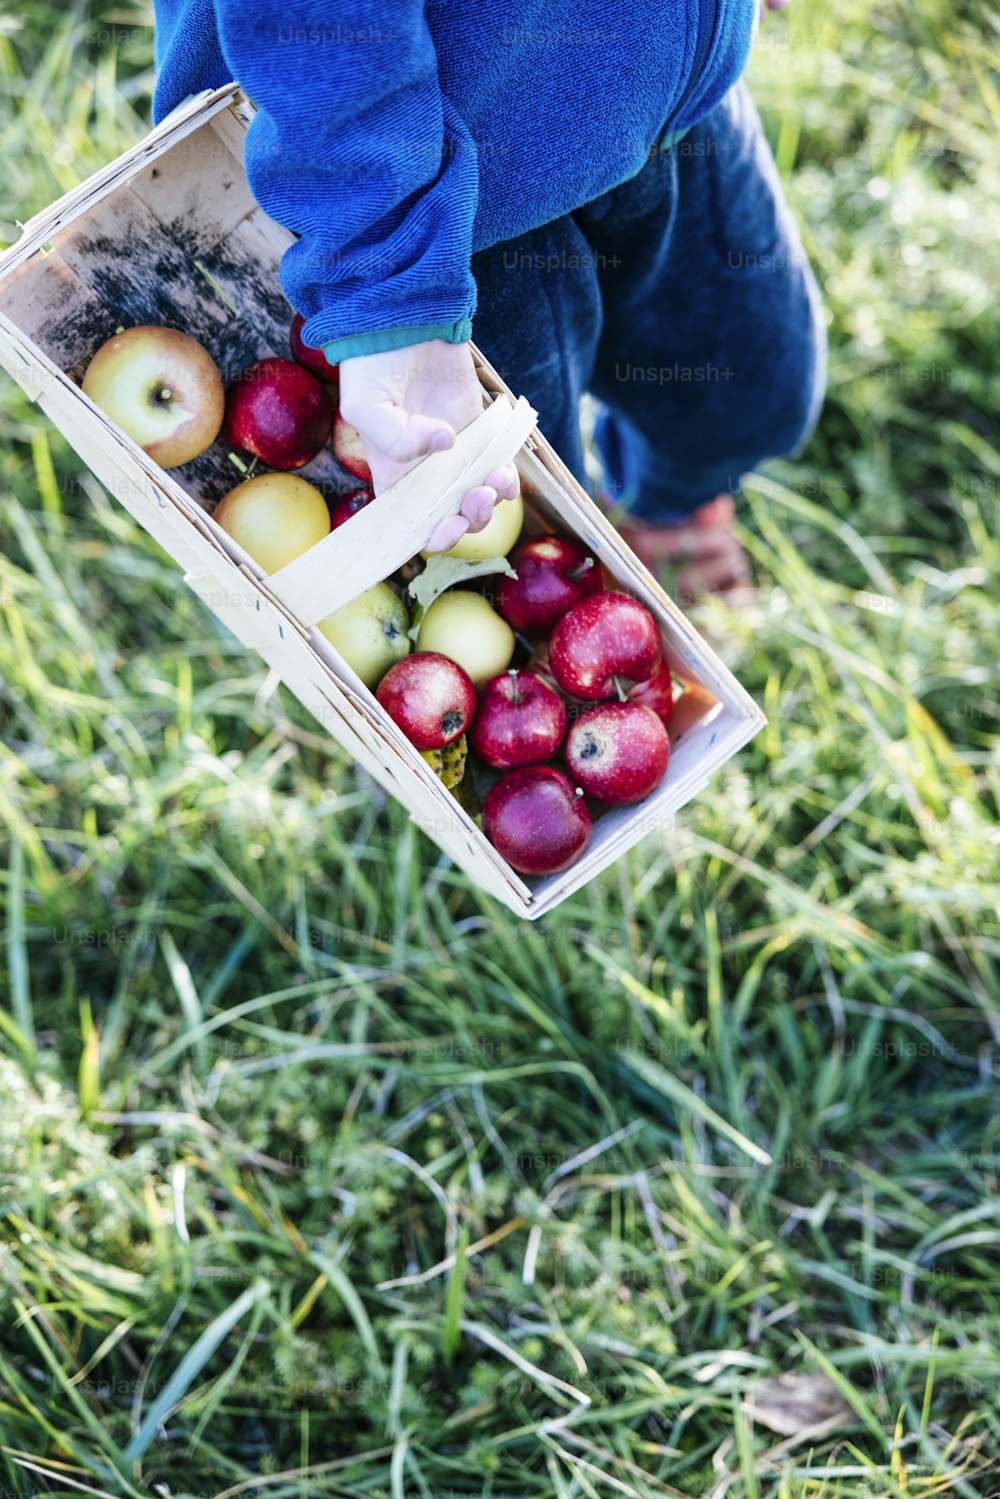 a person holding a box of apples in the grass